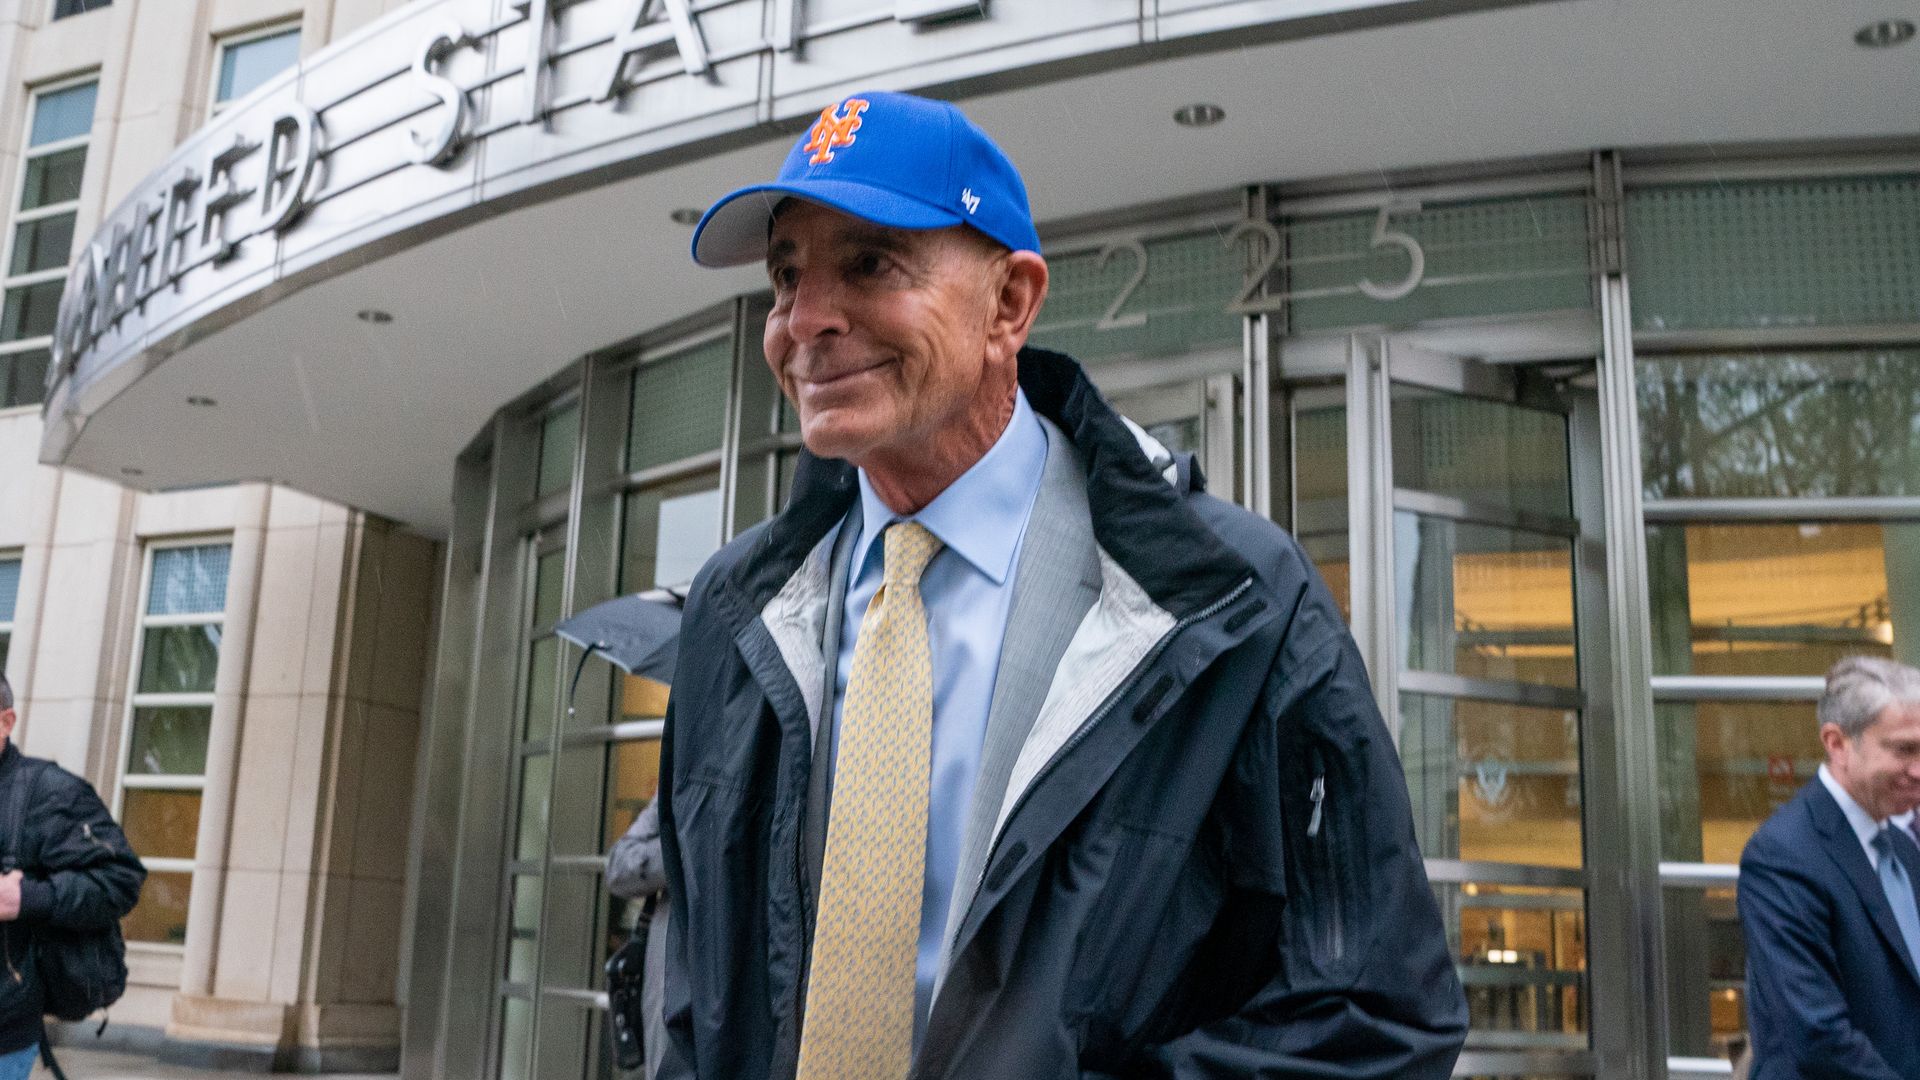 Tom Barrack Jr., founder of Colony Capital Inc., departs from criminal court in New York, US.